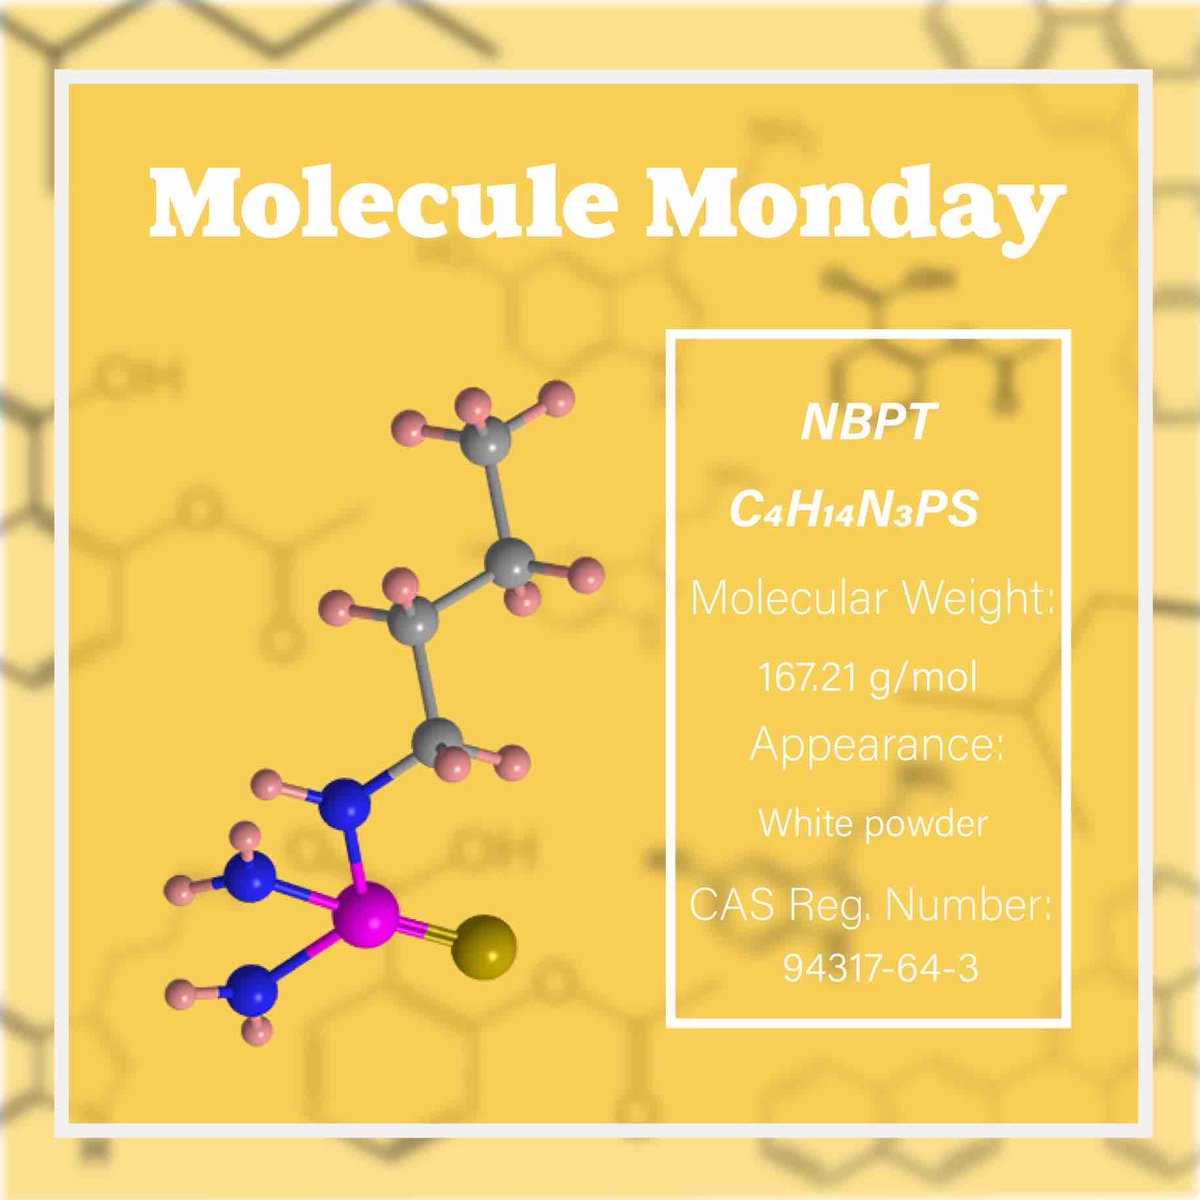 Do you know about n-(n-butyl)thiophosphoric triamide, or NBPT, a molecule that makes nitrogen fertilizers more effective? Learn more about this molecule at acs.org/molecule-of-th…. Images used in this post are from asc.org.